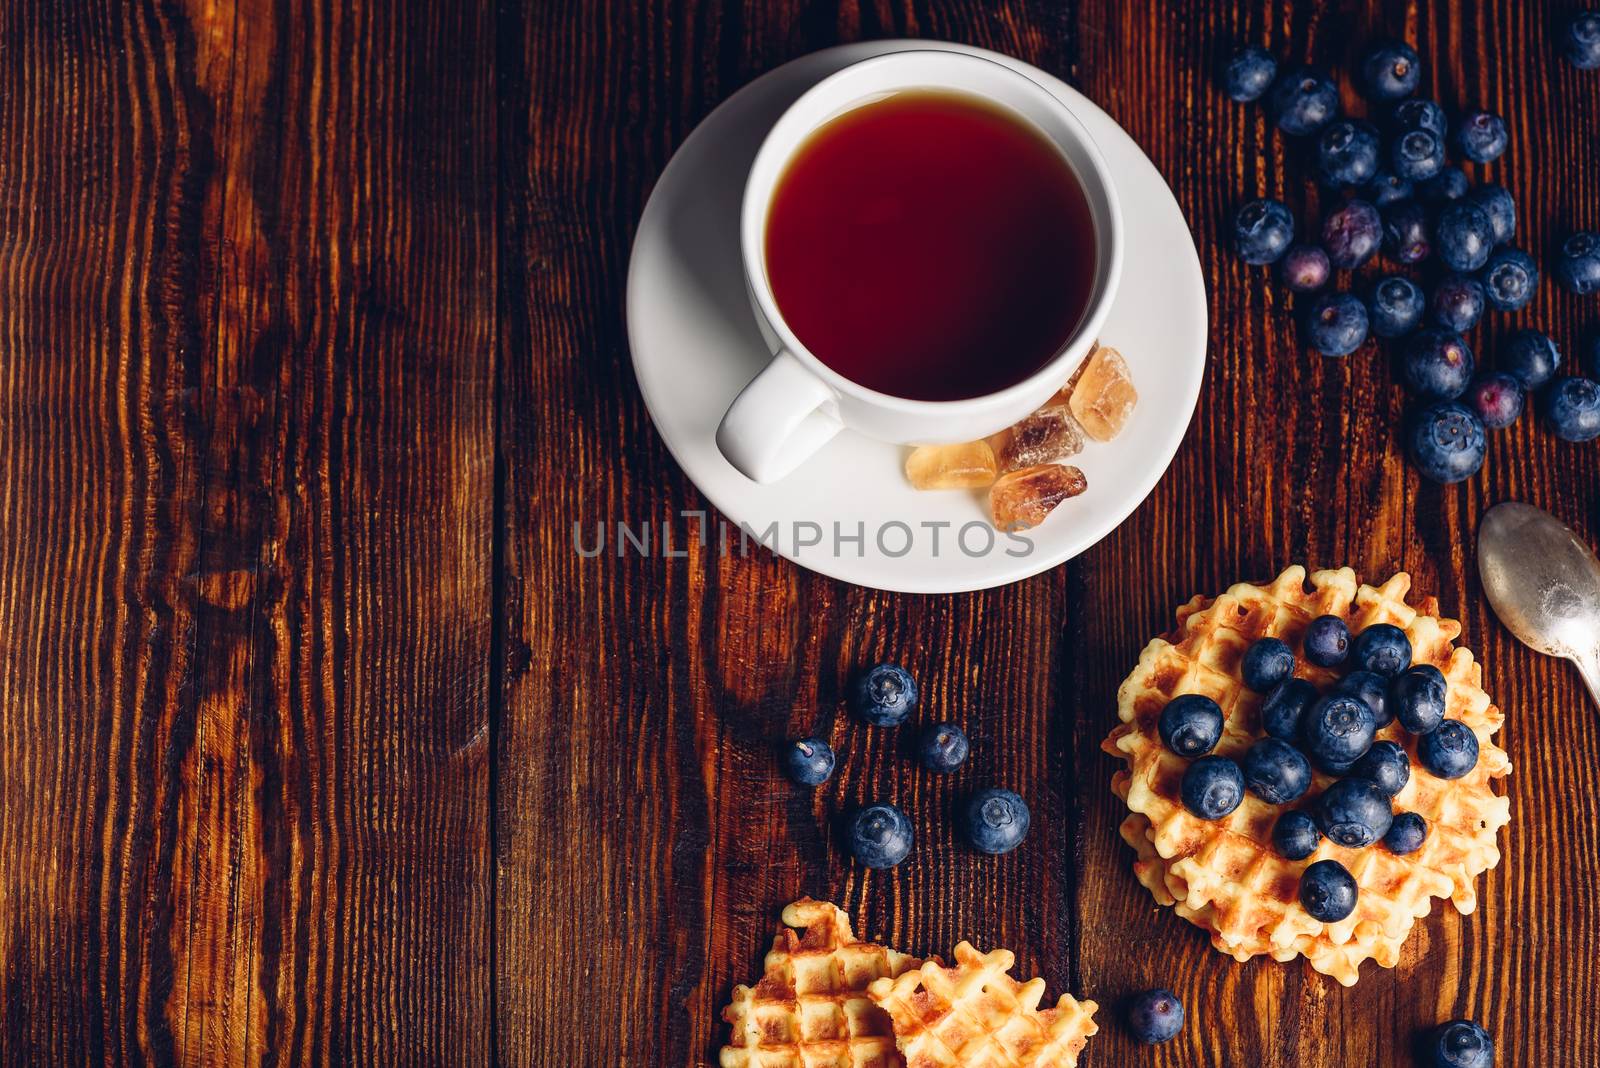 White Cup of Tea with Blueberry and Homemade Waffles on Wooden Background. Copy Space on the Left.